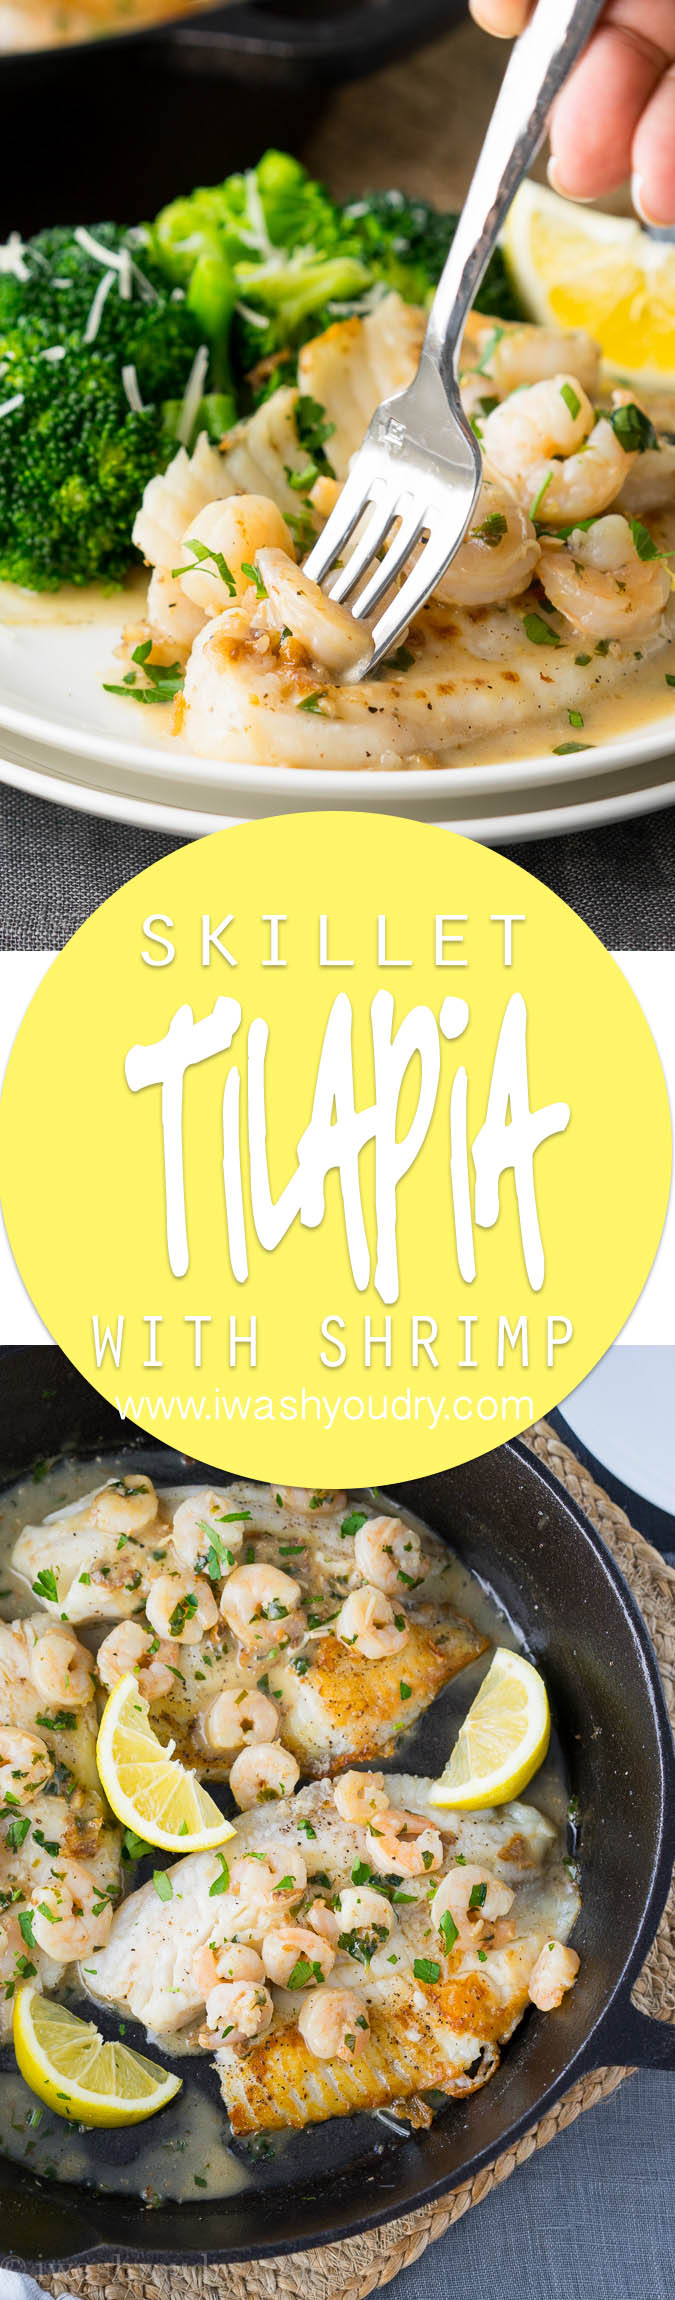 This quick and easy Skillet Tilapia with Shrimp is made in just one skillet and have an outrageously good white wine lemon pan sauce! My whole family loved this! 